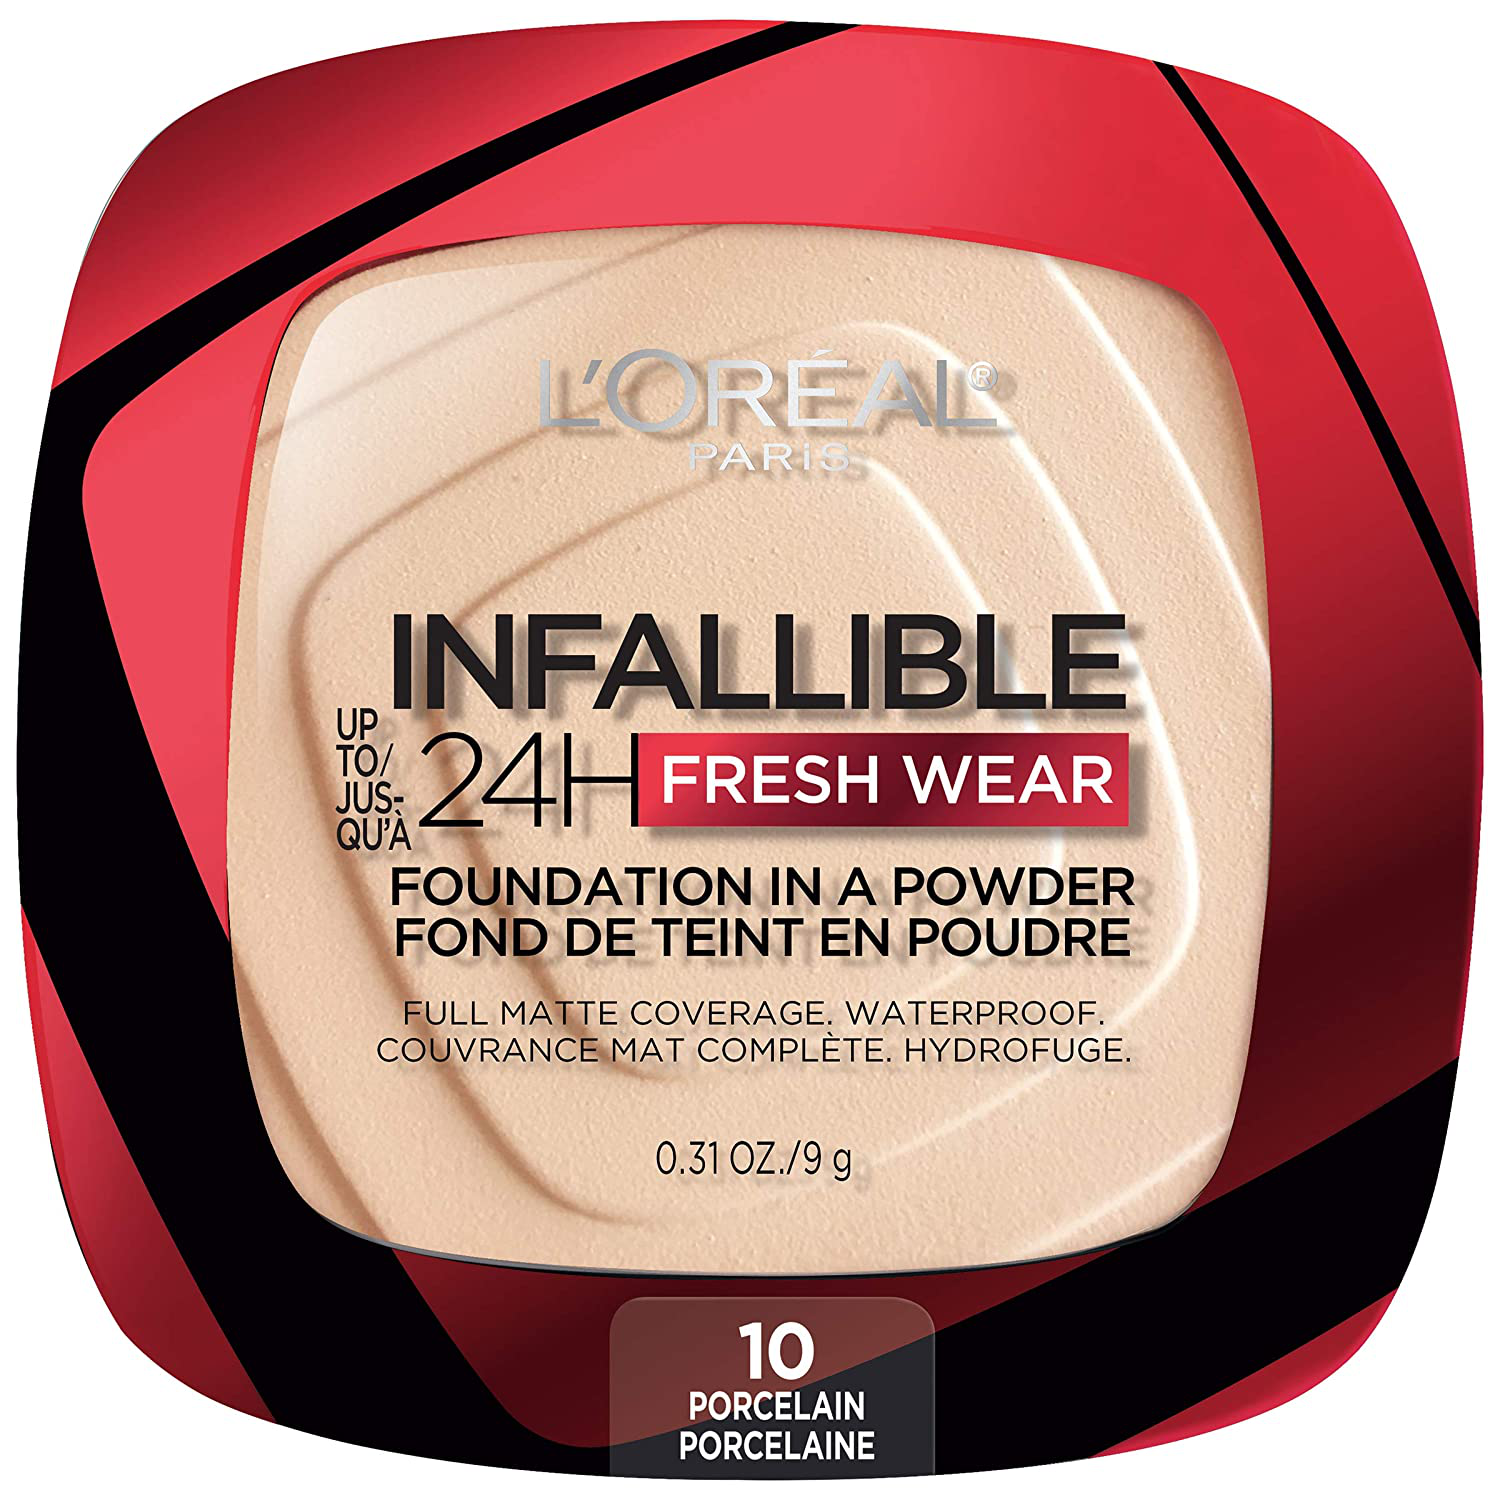 L'Oreal Paris Infallible Fresh Wear Foundation in a Powder, Up to 24H Wear